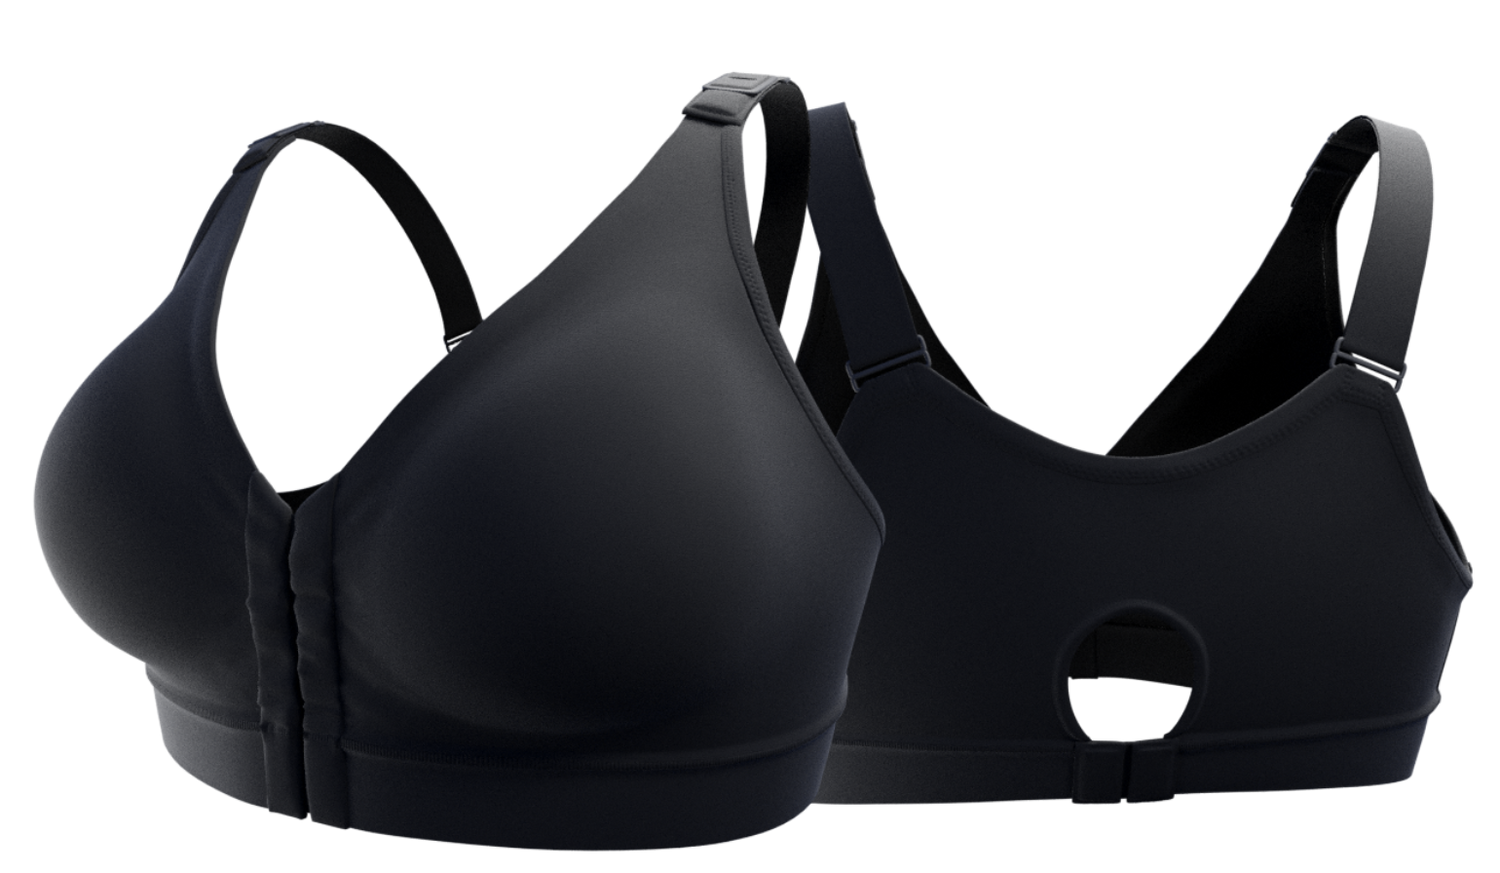 LaBratory Bras  Beautiful, Comfortable, Supportive Post-Surgical